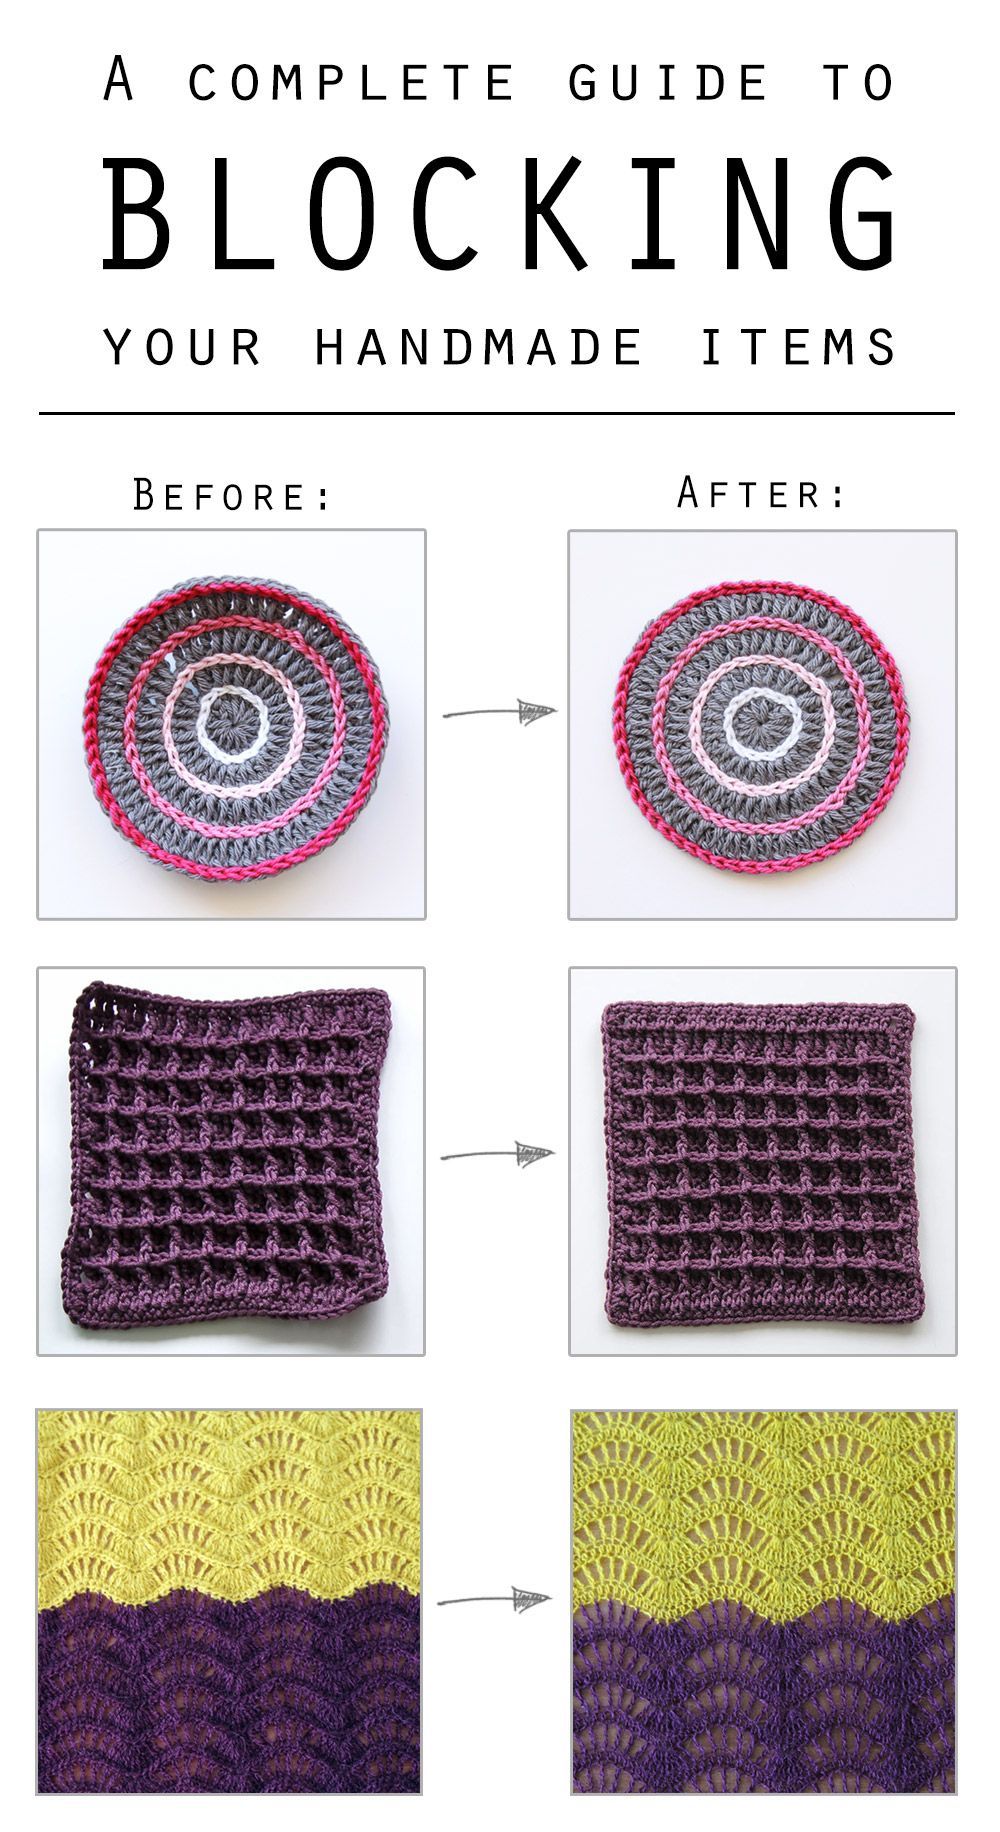 How to block your crocheted or knitted items - haakmaarraak.nl -   17 knitting and crochet Projects colour ideas